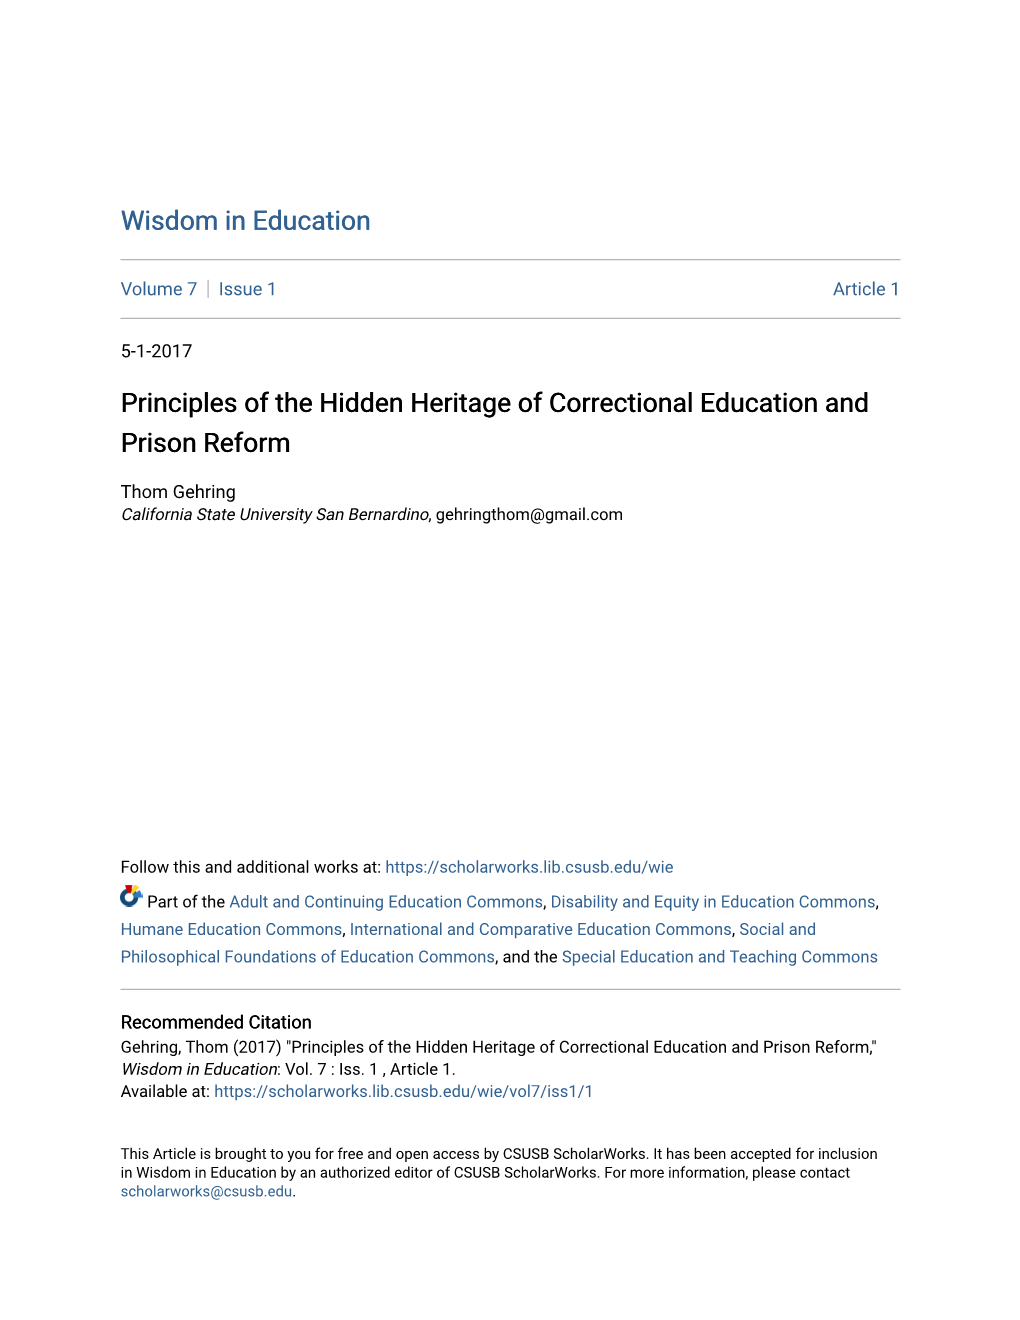 Principles of the Hidden Heritage of Correctional Education and Prison Reform